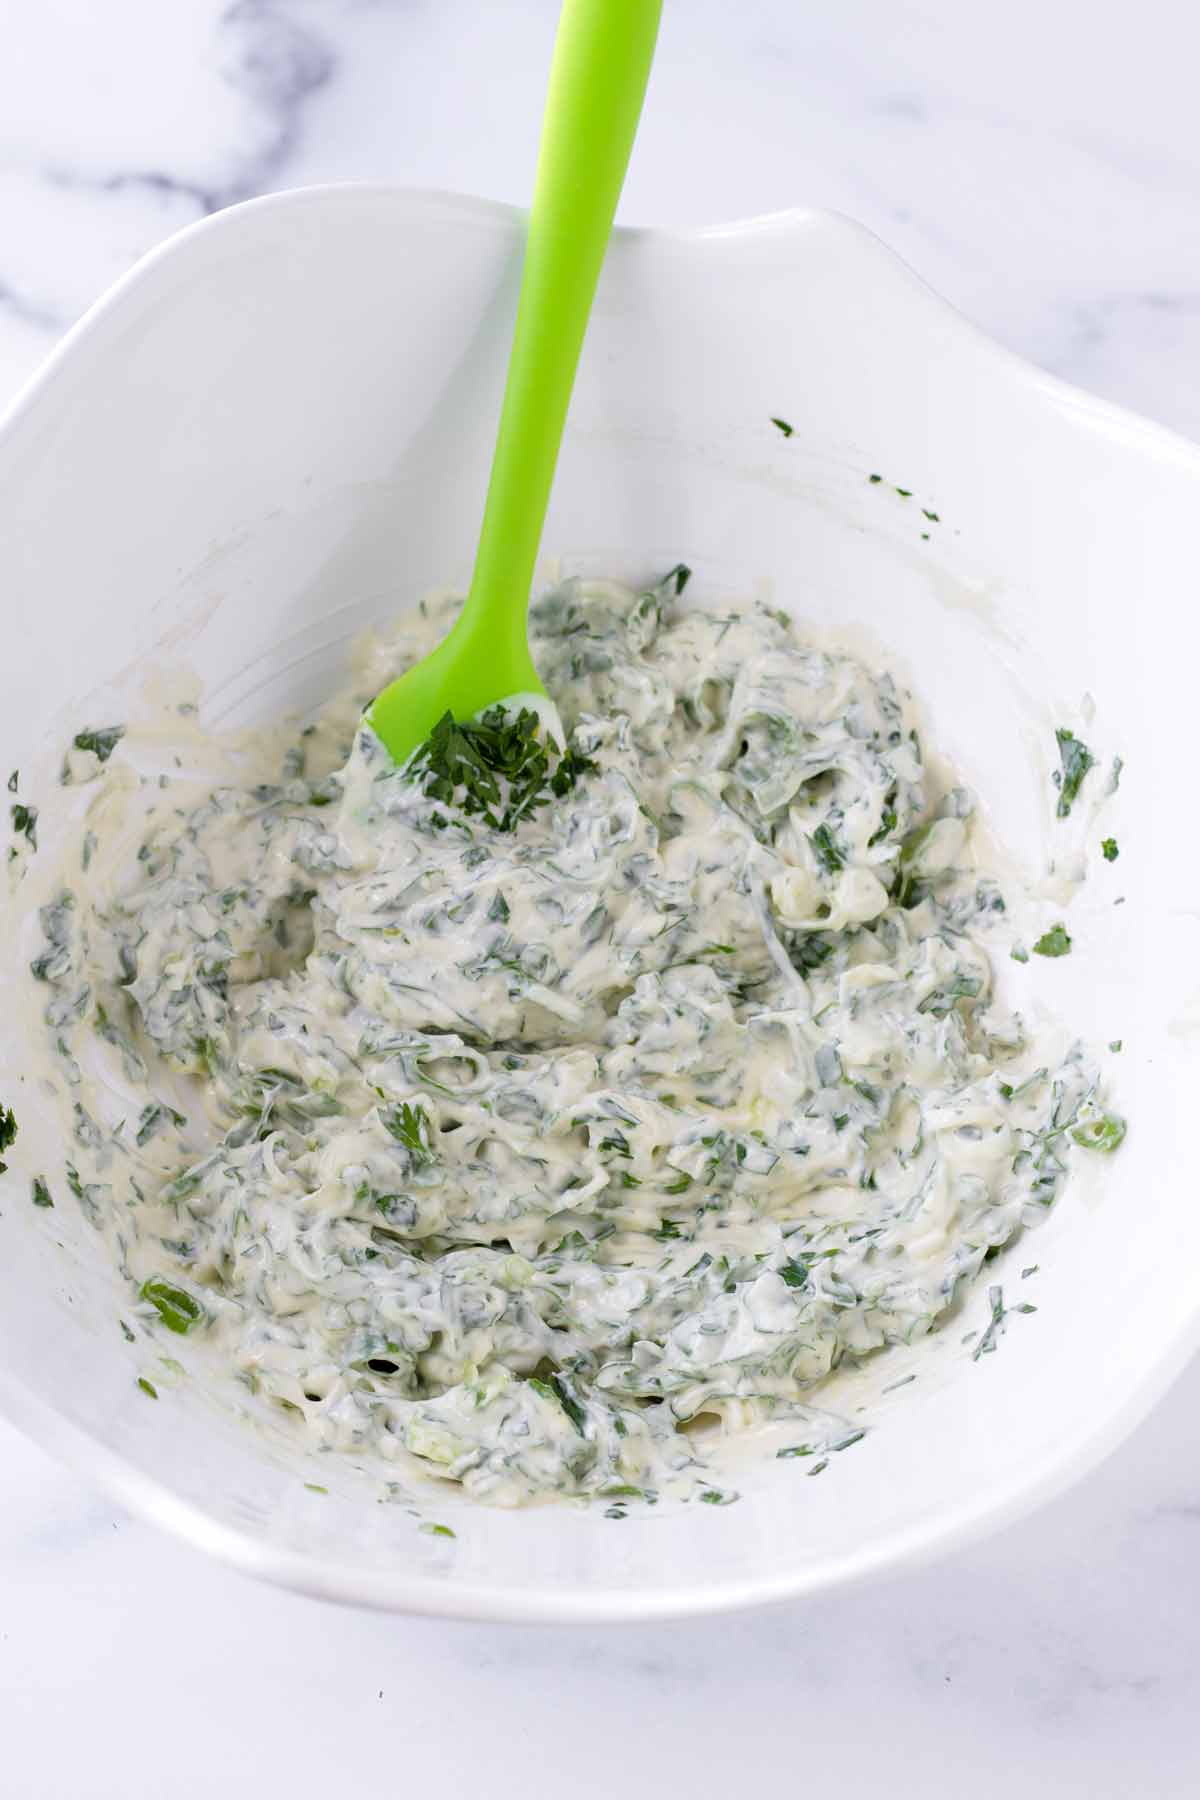 mixing the creamy mayo and herb dressing with a rubber spatula